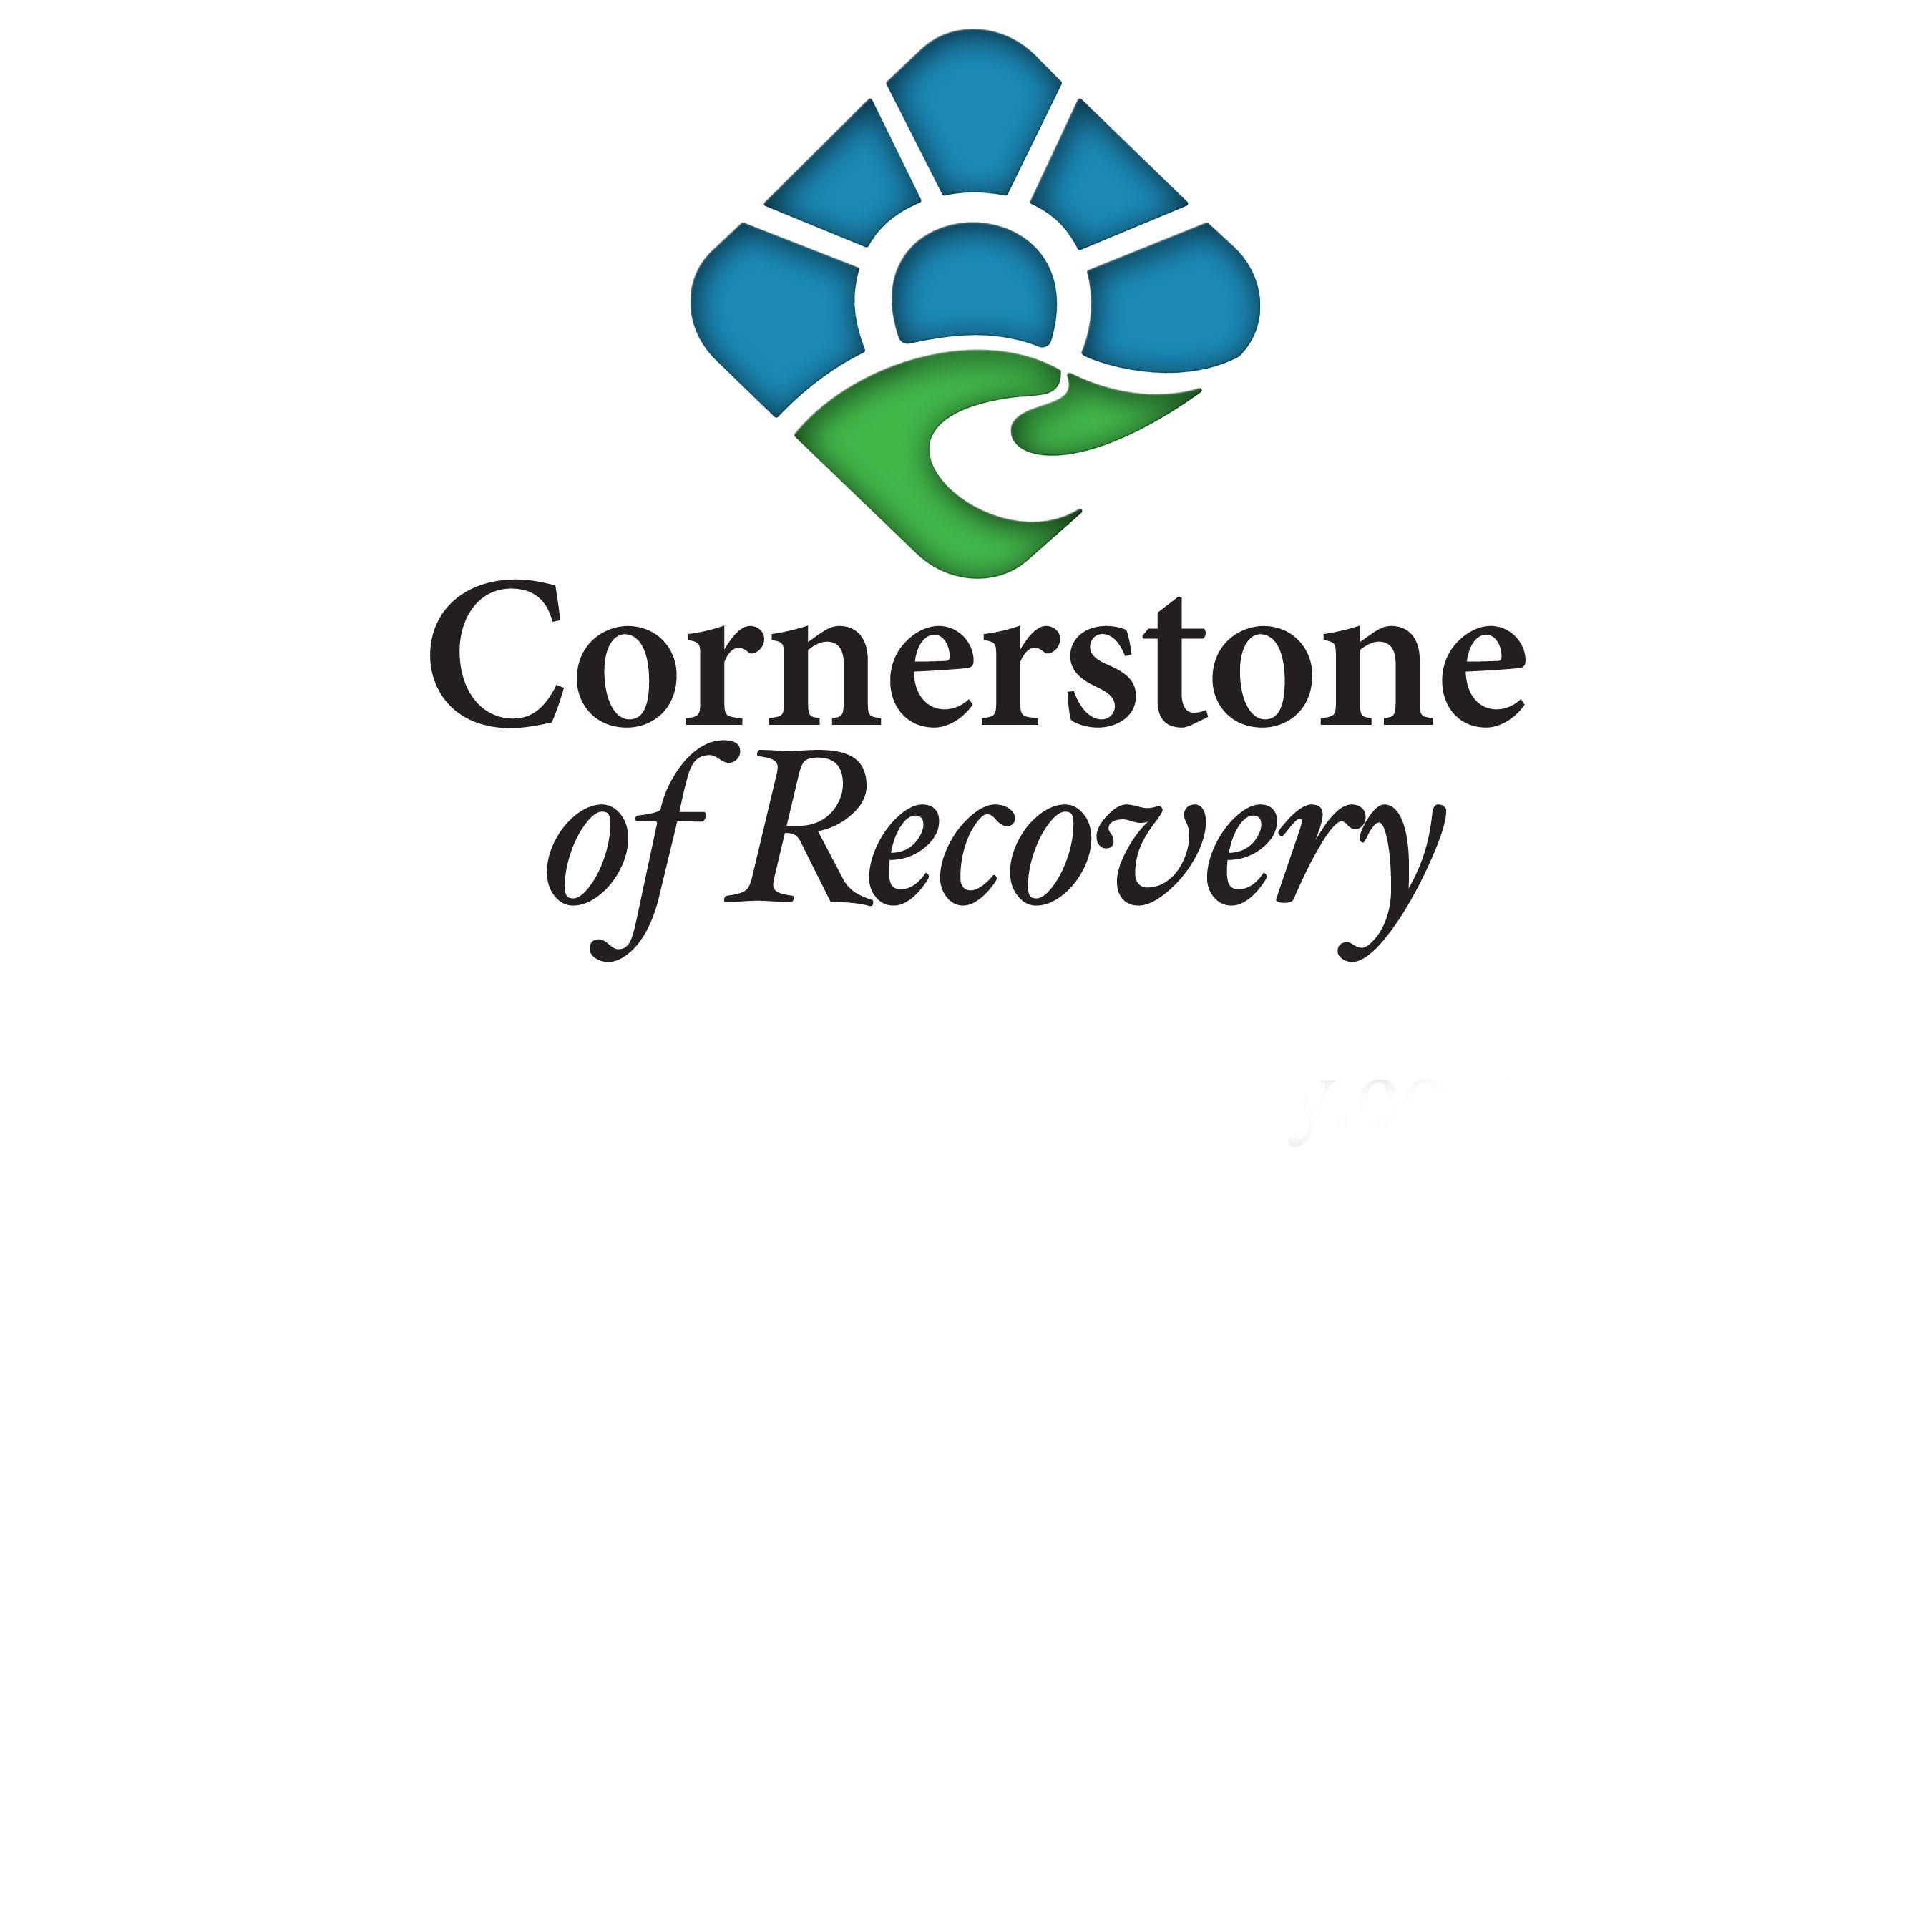 Recovering Logo - For recovering addicts and alcoholics, the holidays can be stressful